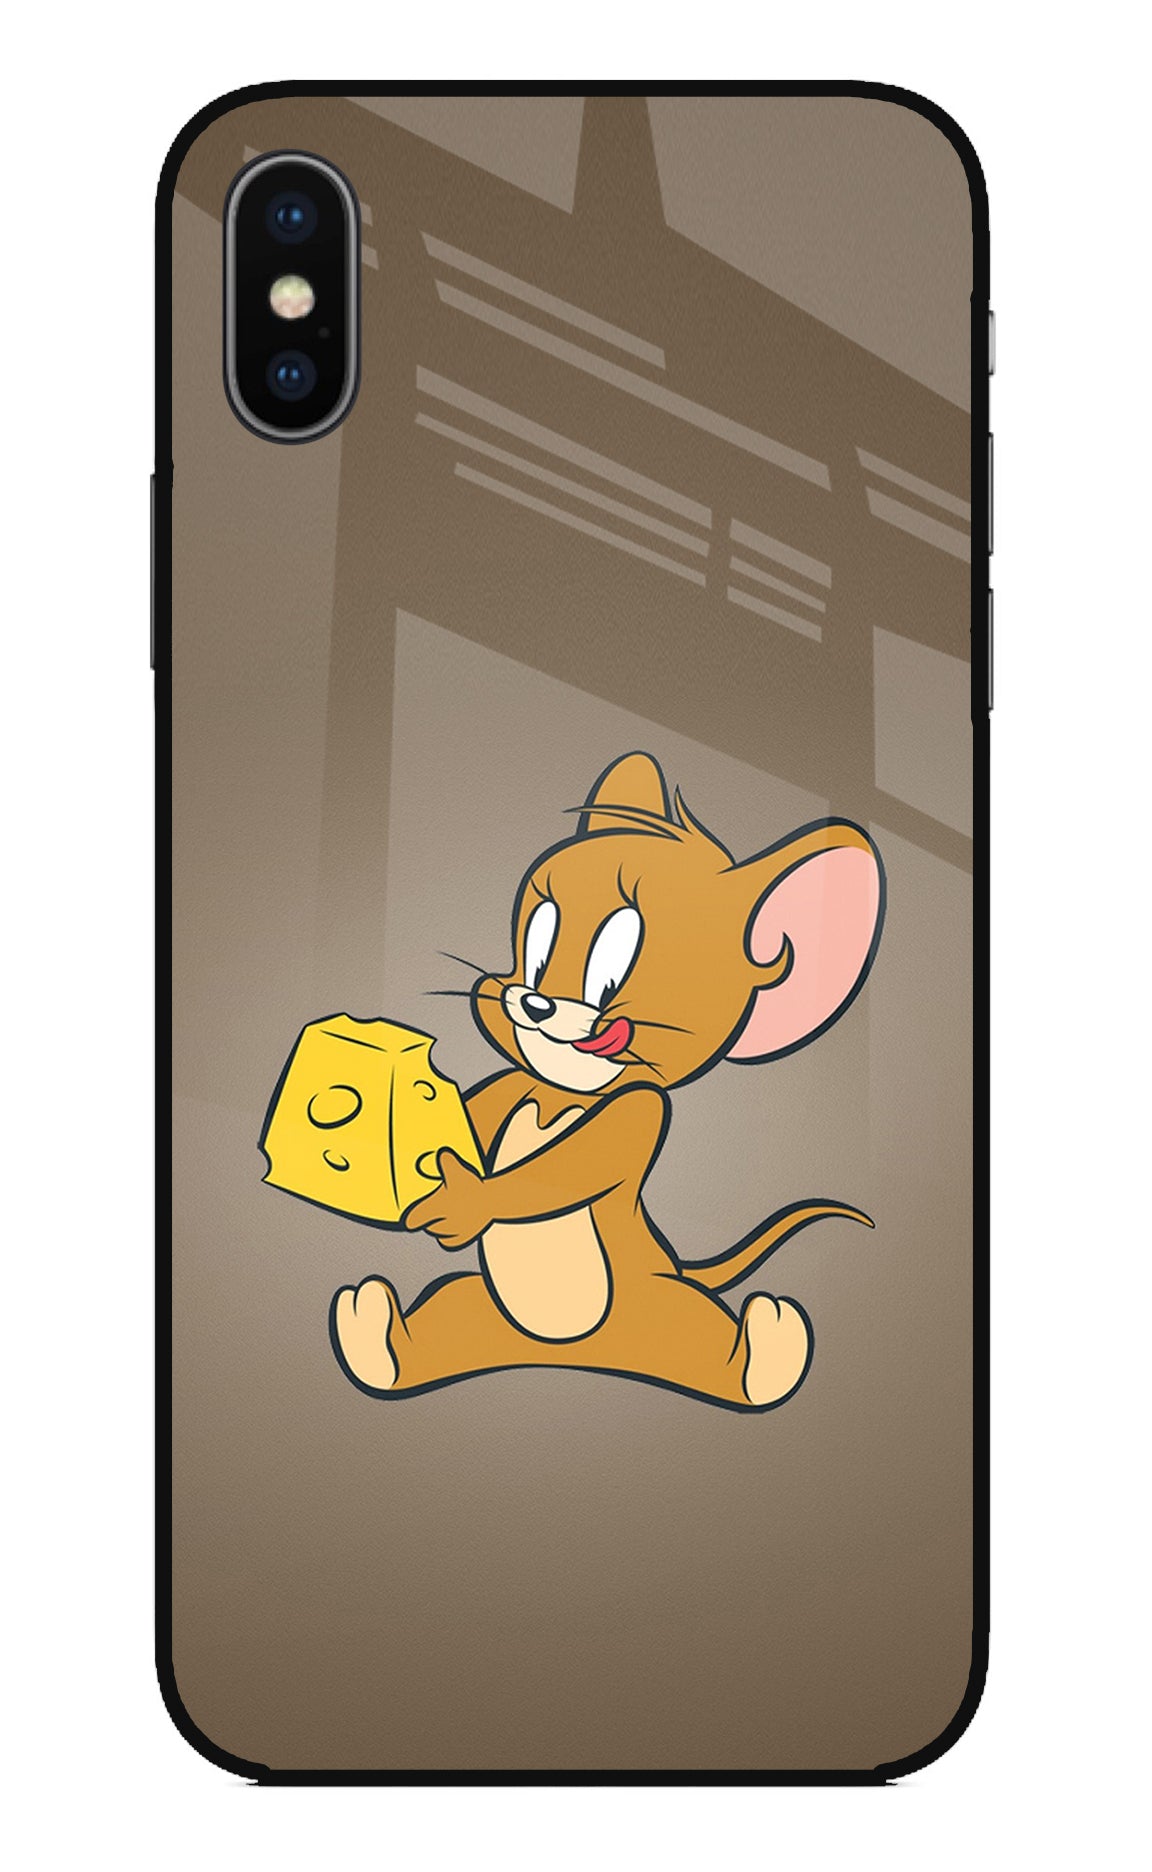 Jerry iPhone X Back Cover